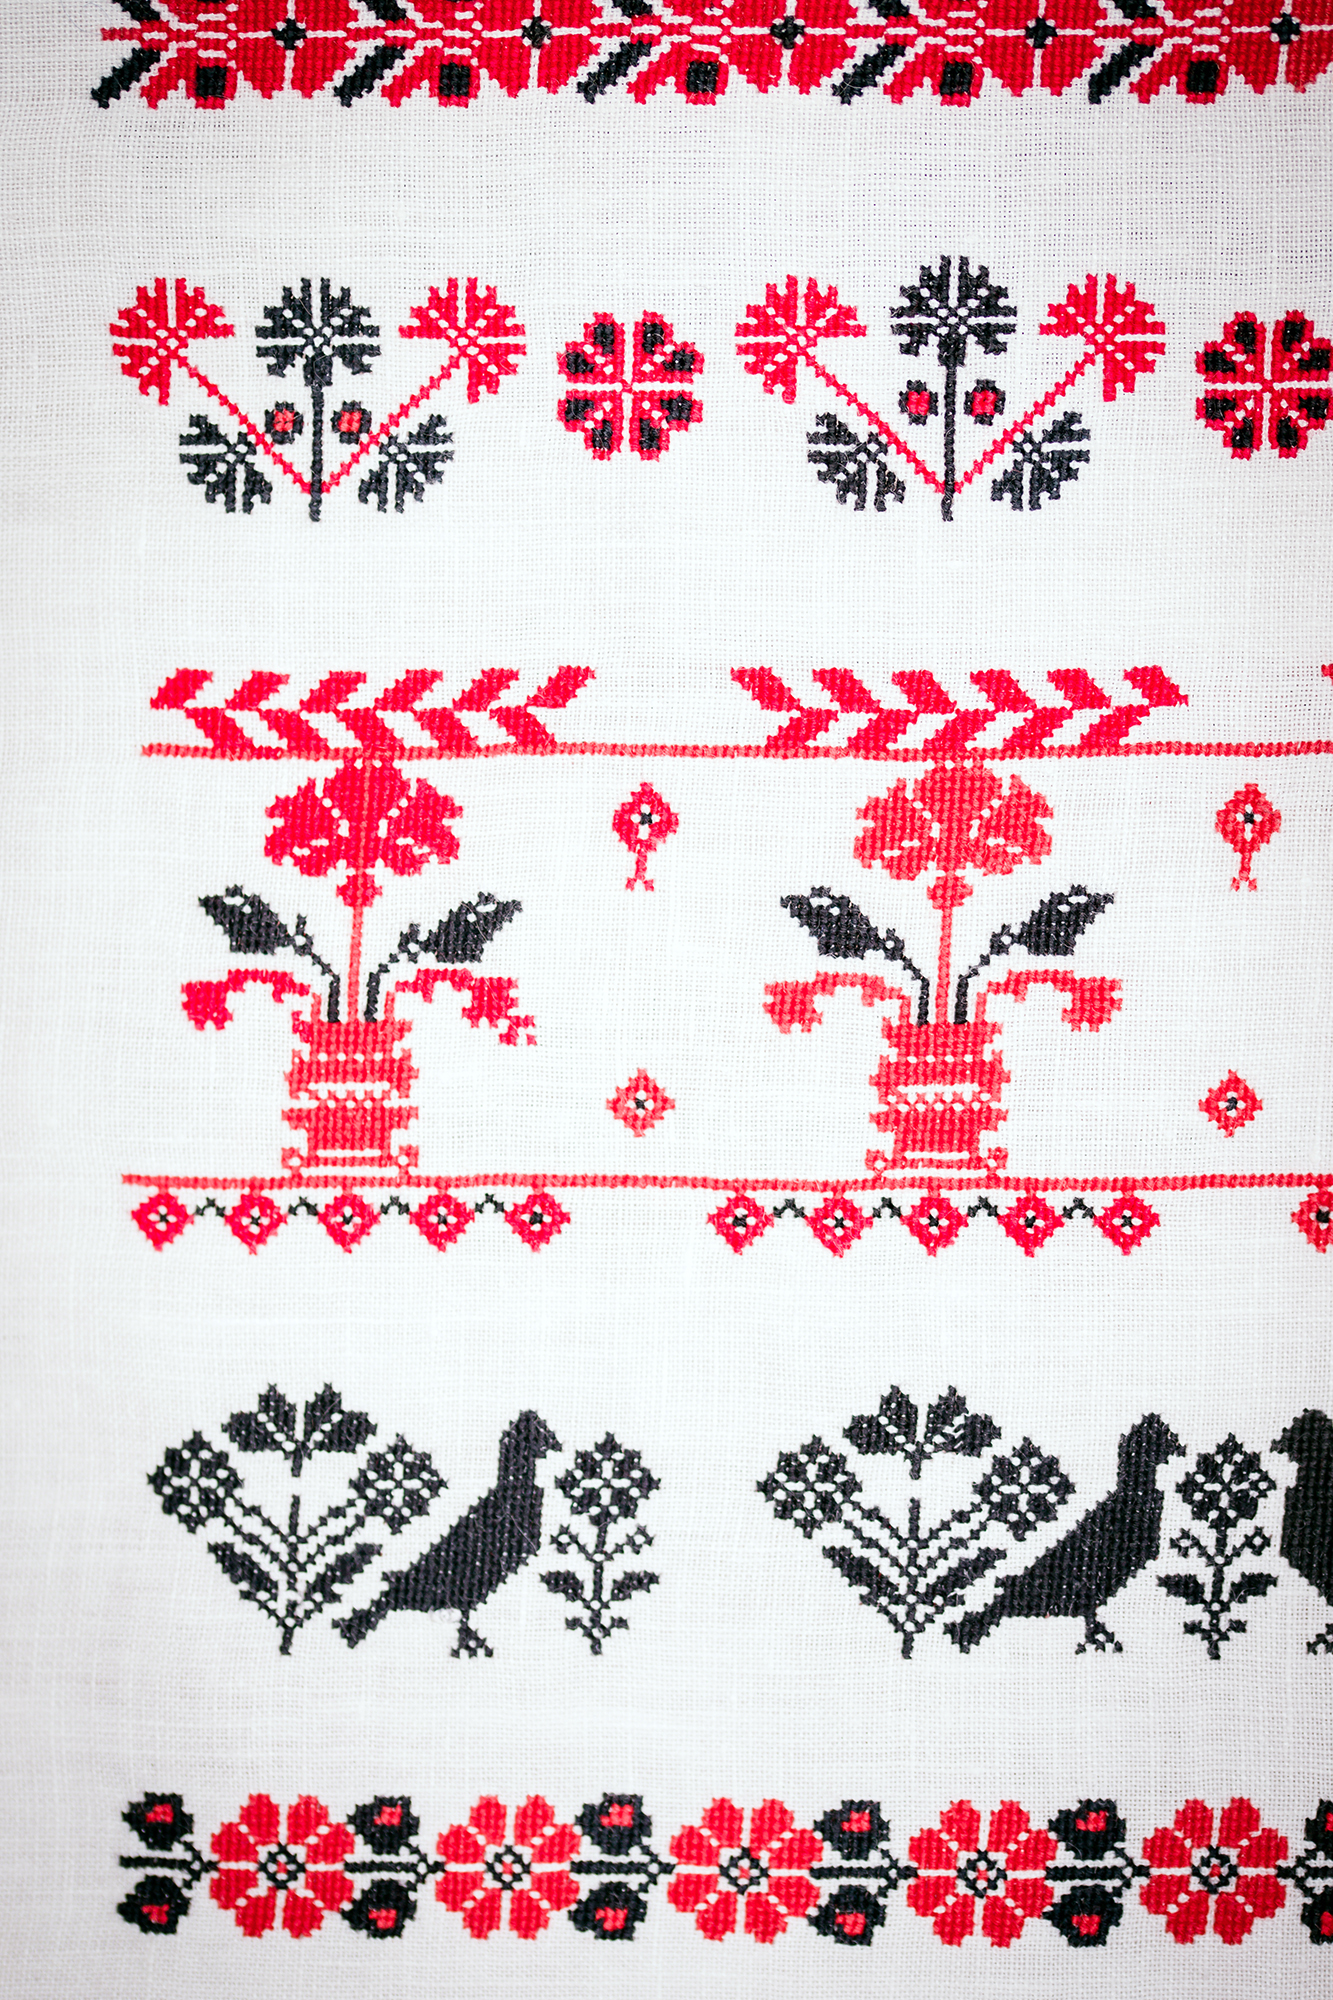 Embroidery from the sample book of the Ukrainian, Lemko, and Huculi embroideries.